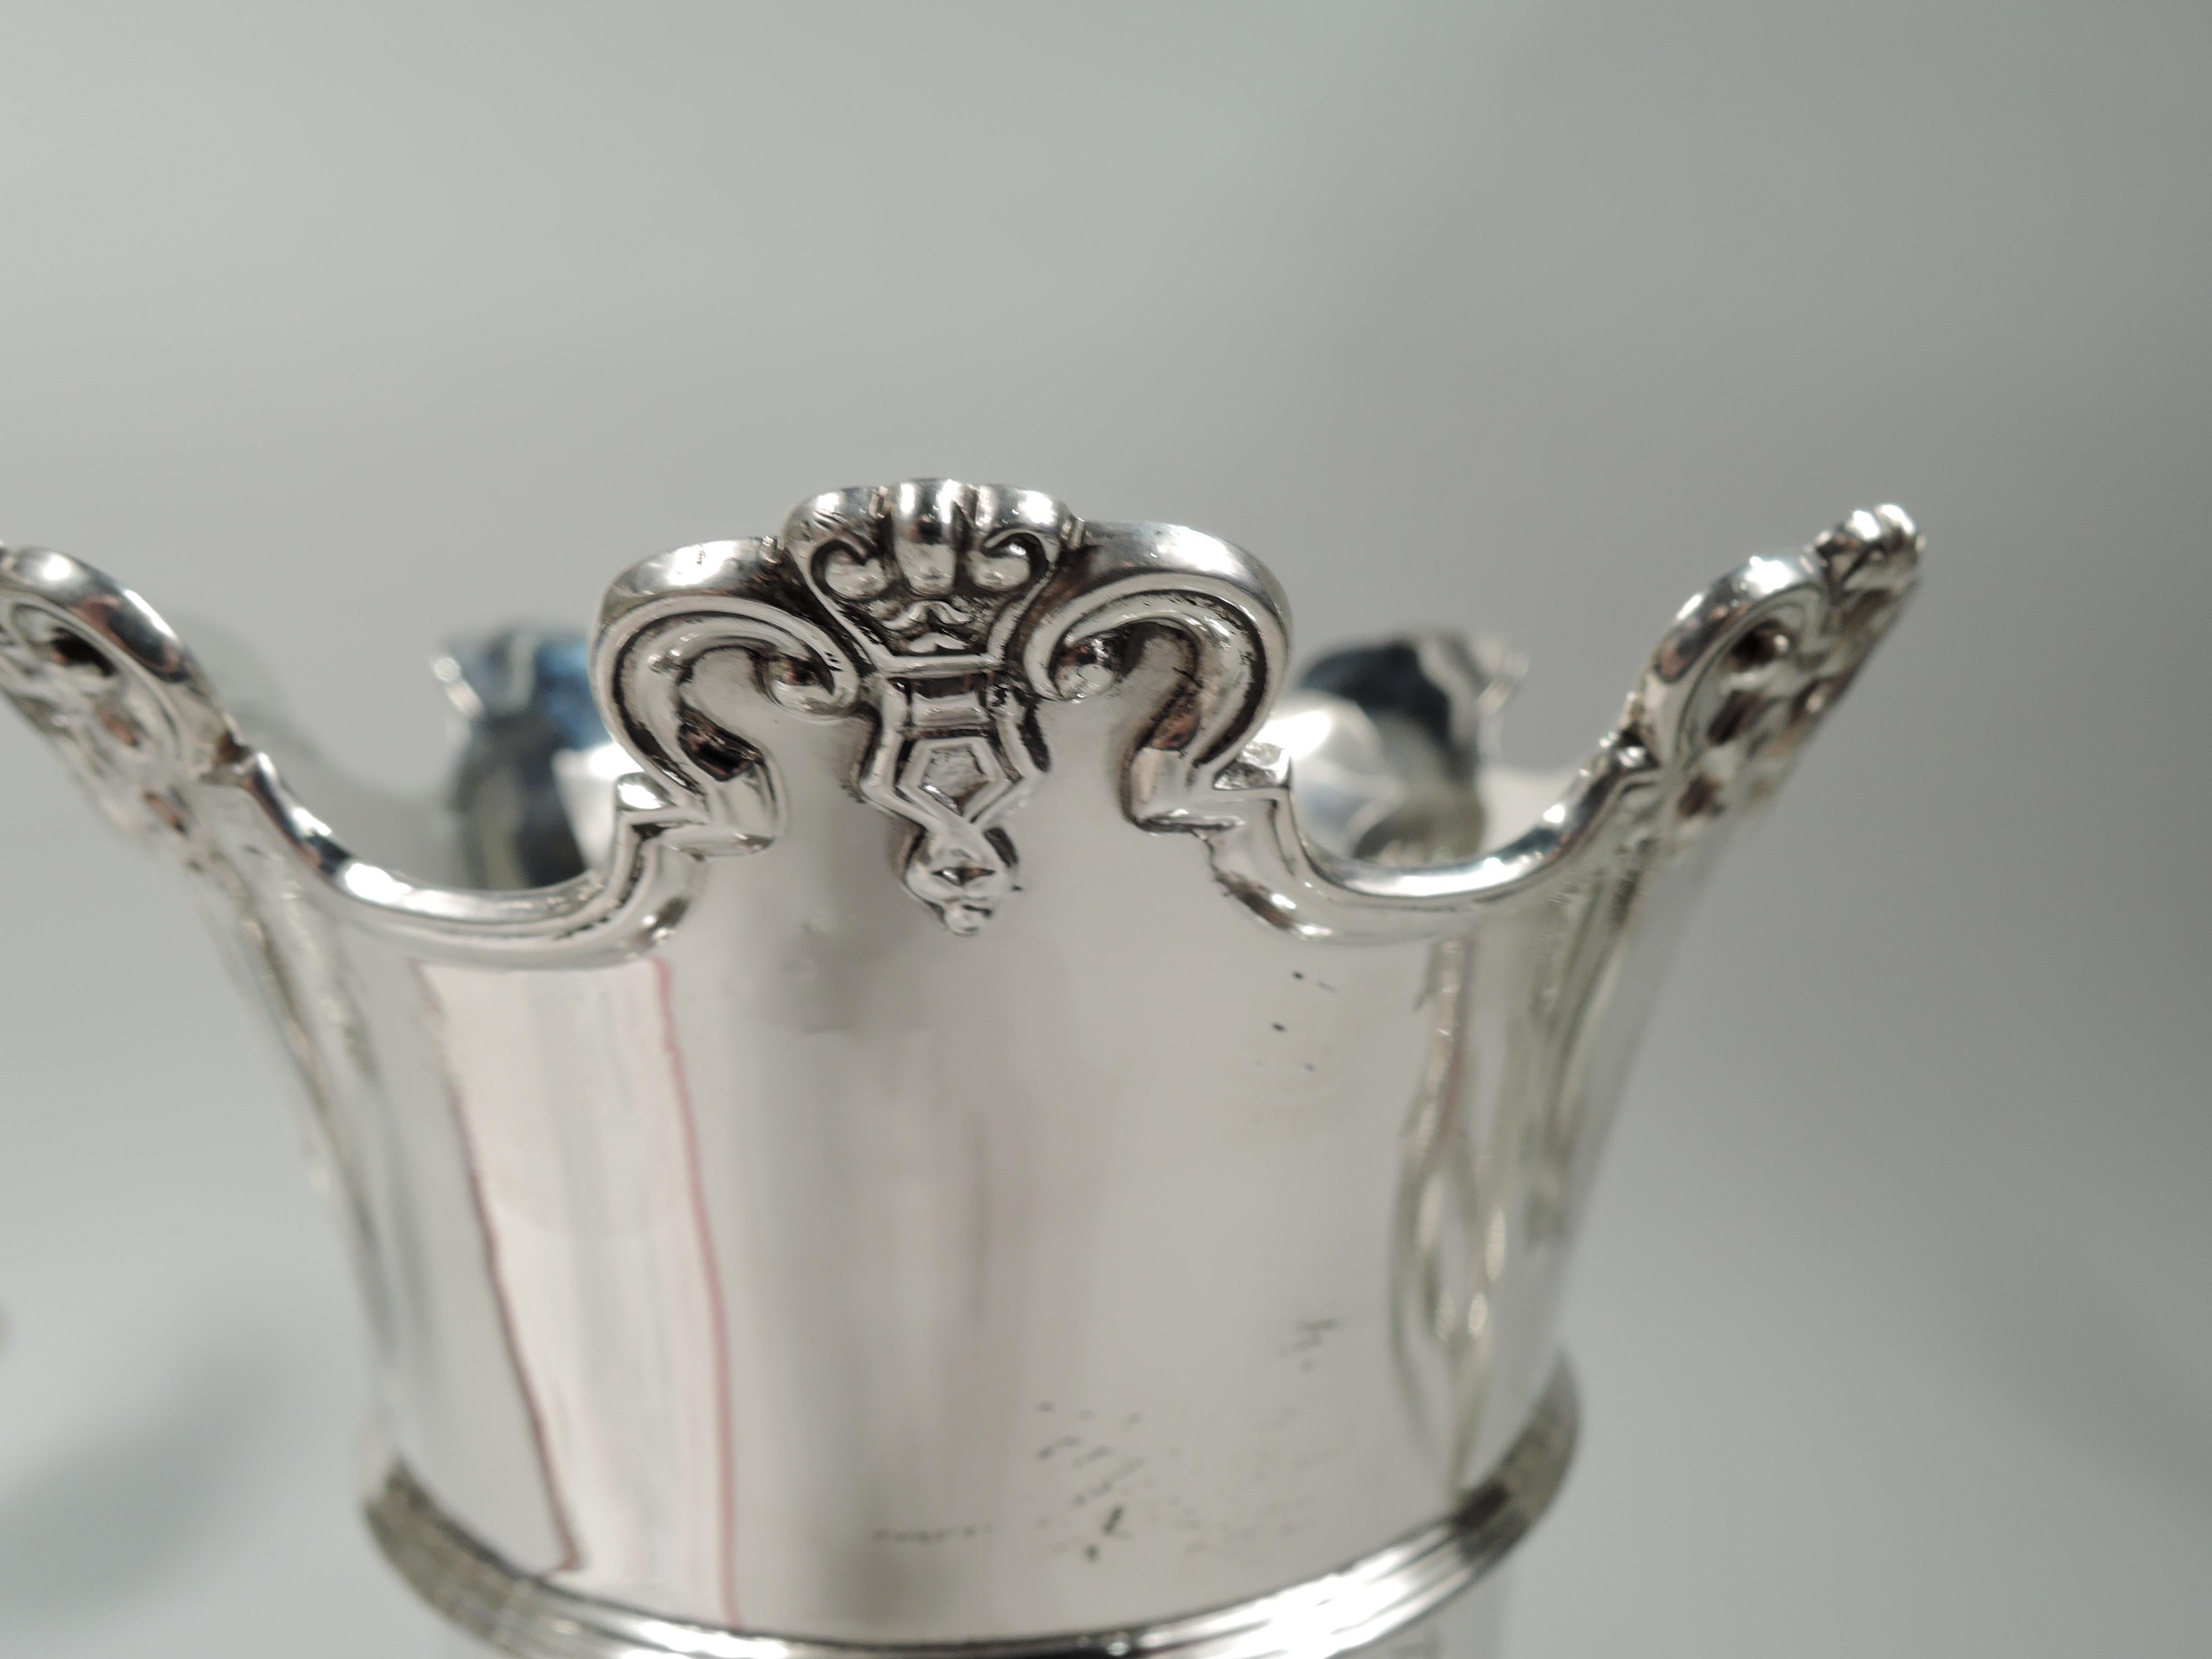 Neoclassical Revival Antique English Edwardian Neoclassical Sterling Silver Vase